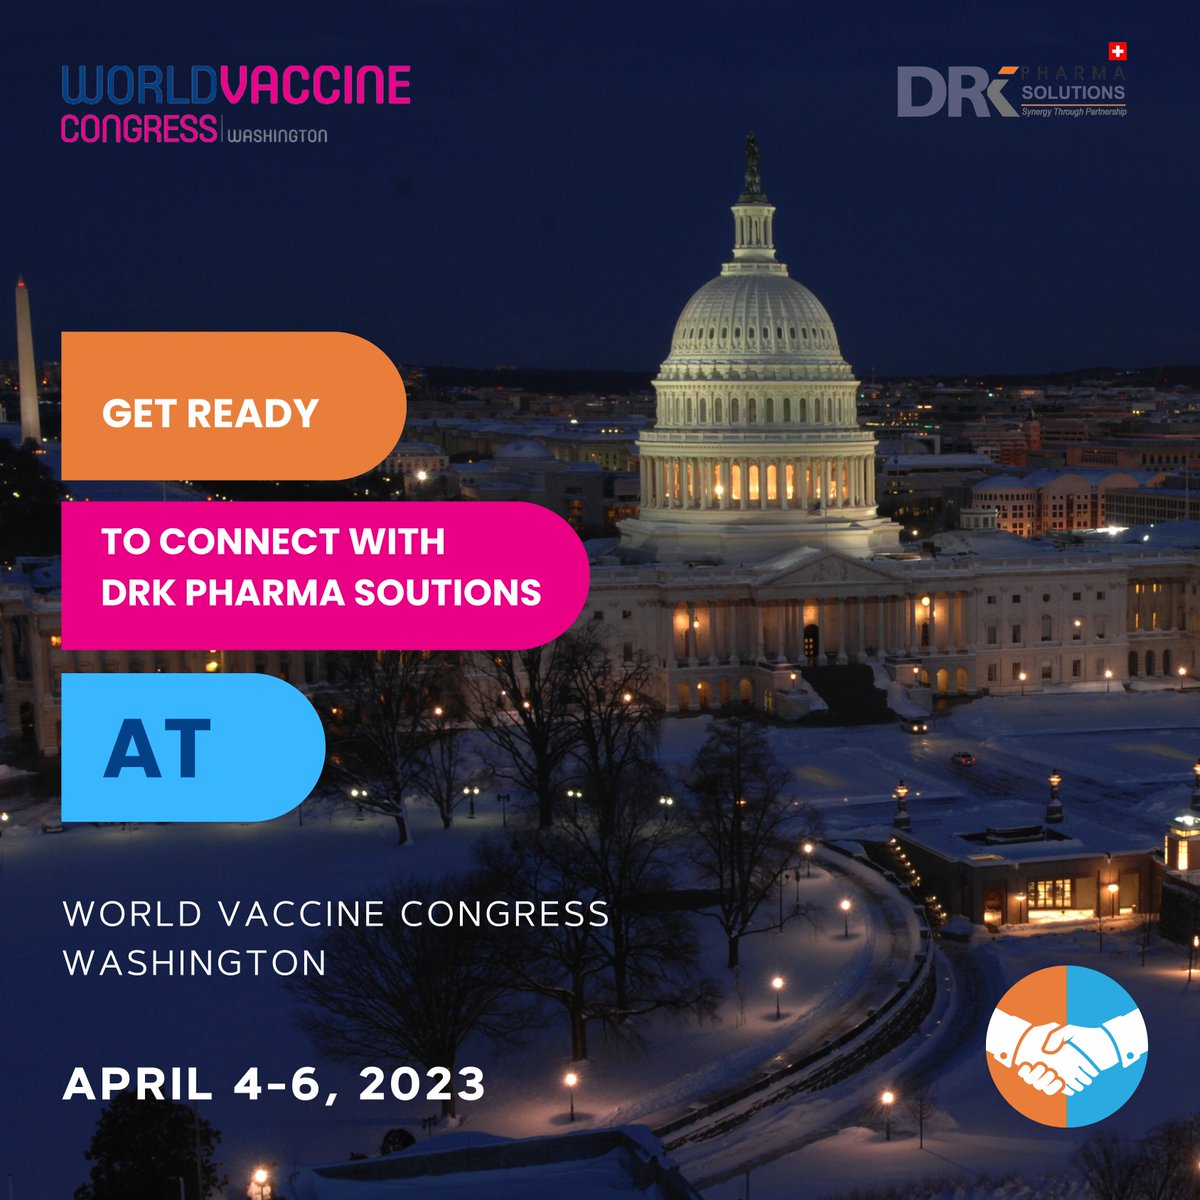 Let's create an impact!
Email ID: sashfaq@drkpharmasolutions.com

#DRKpharmasolutionsGmbH #worldvaccinecongress #april2023  #washington #communities #lmics #impact #collaborate #experts #pharmaceuticals #biopharmaceuticals #innovation #networking #partnering